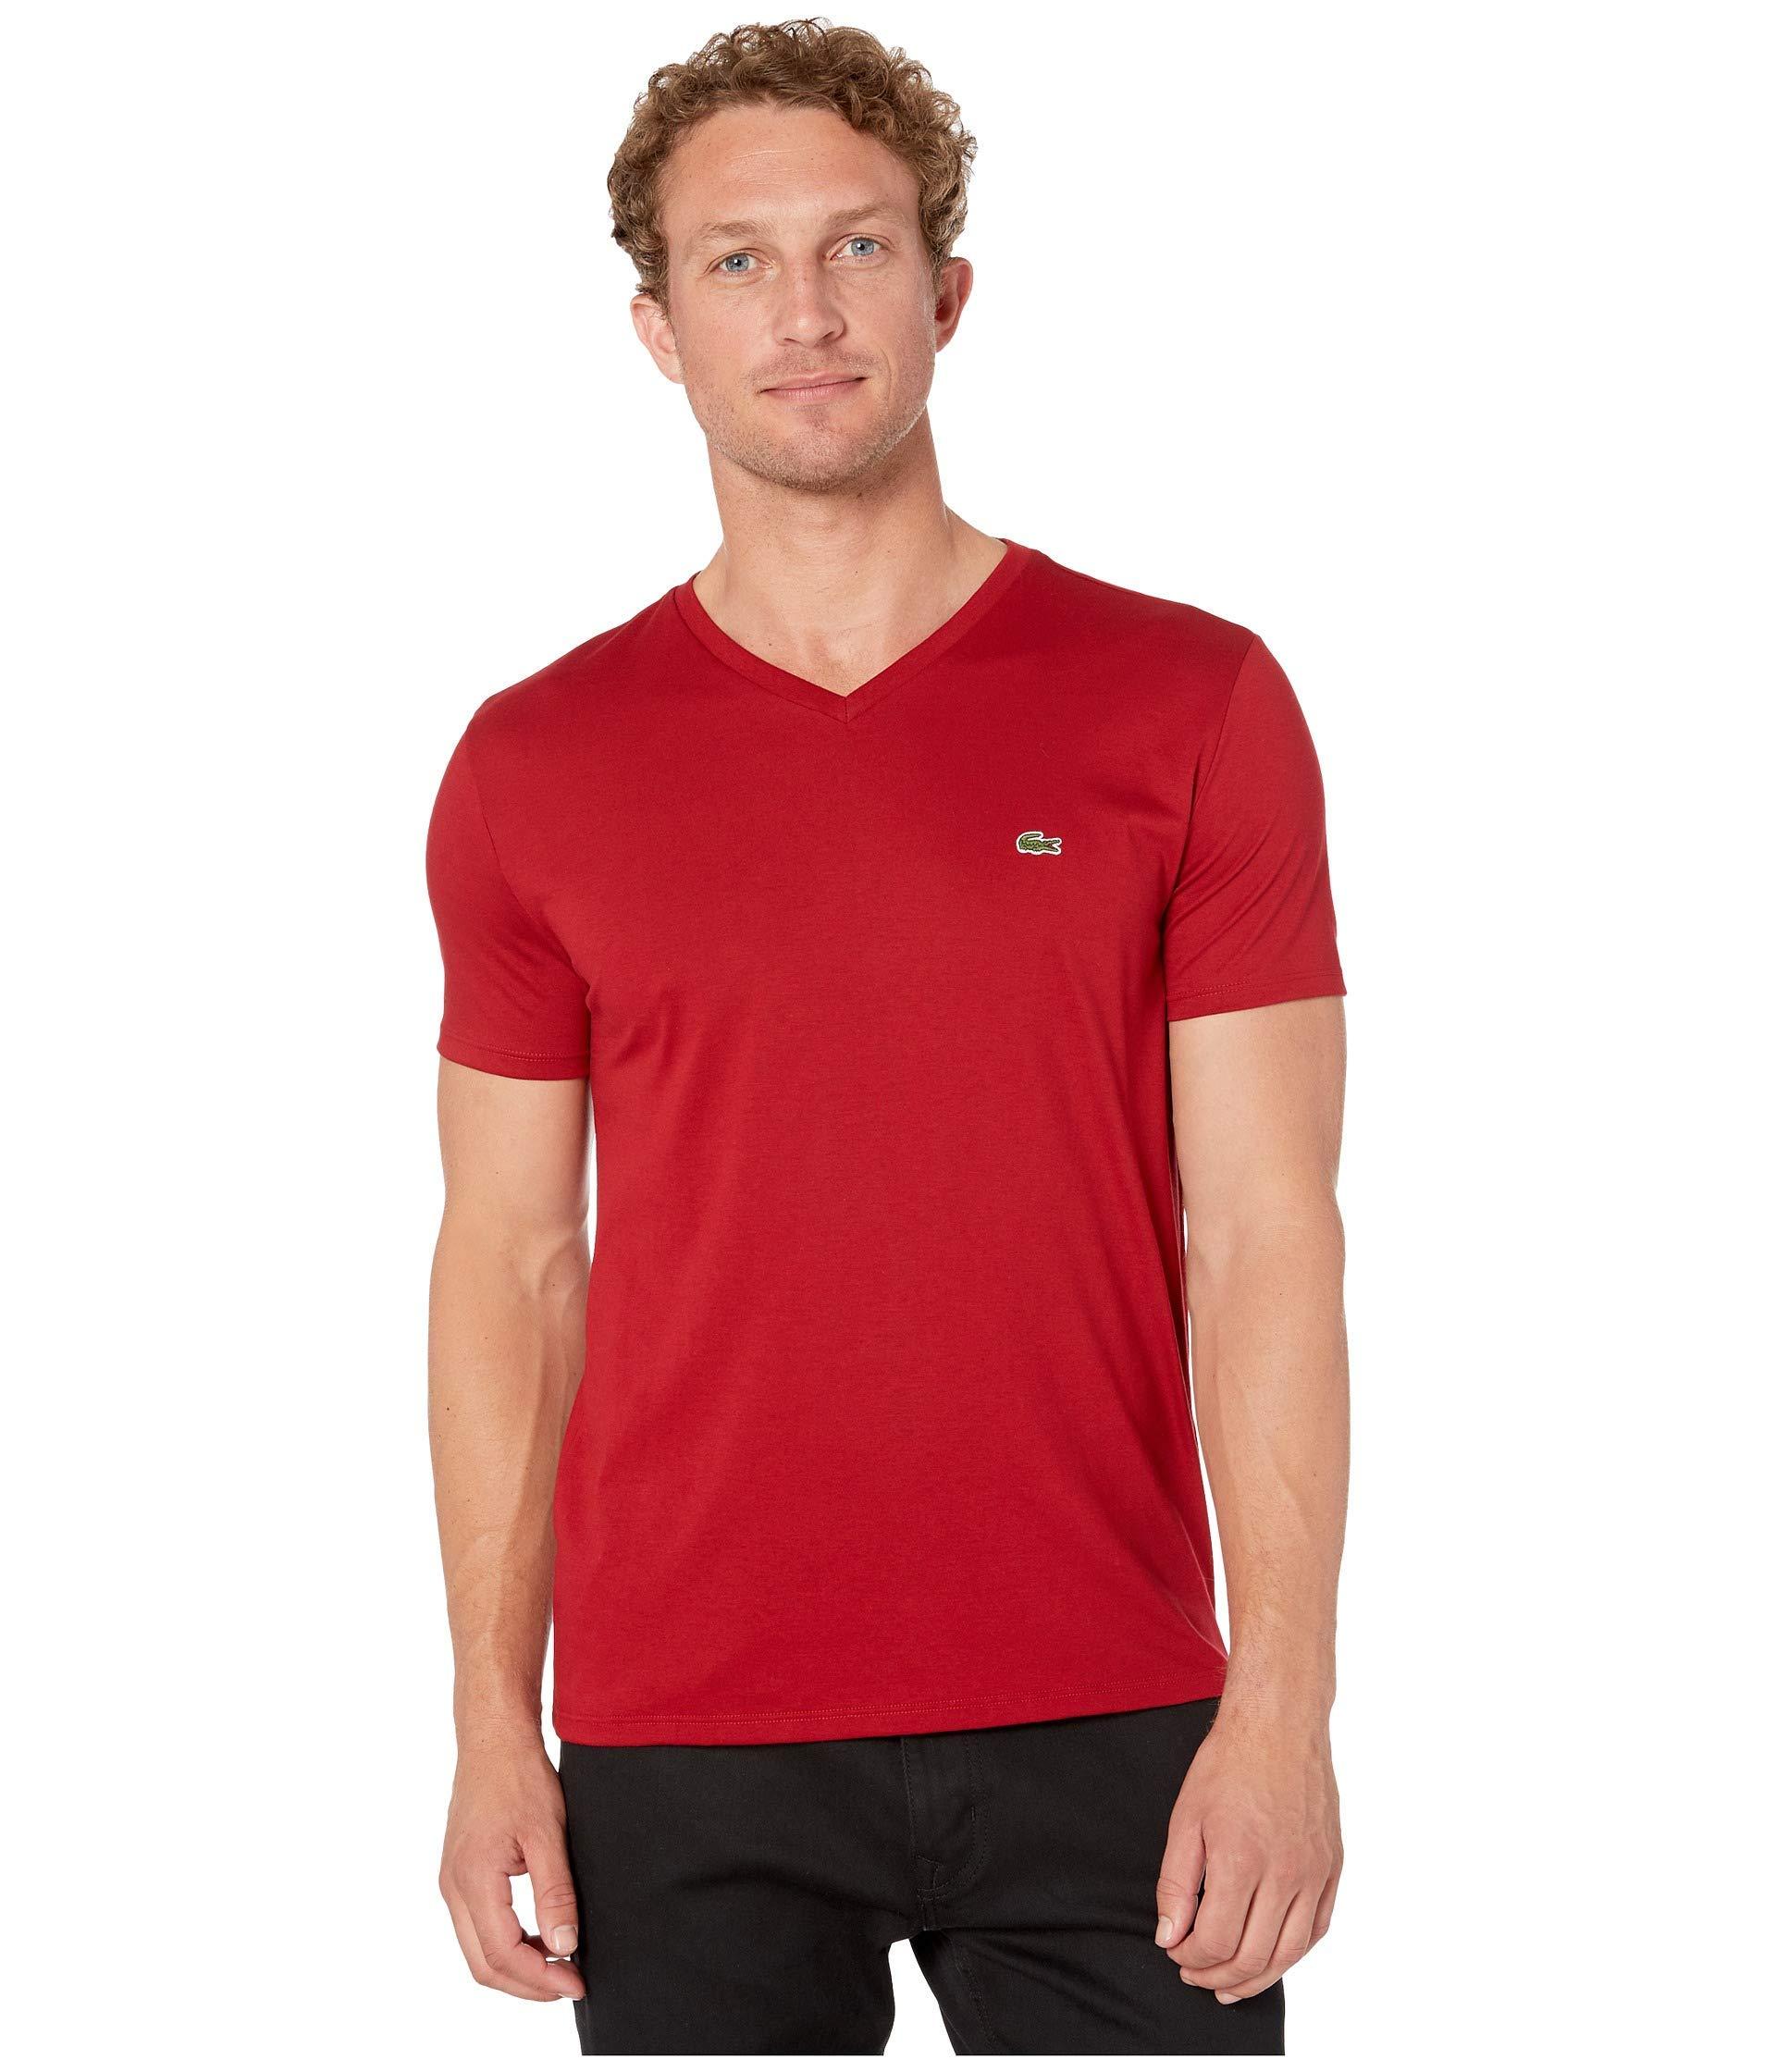 Lacoste Cotton S/s Pima Jersey V-neck T-shirt in Burgundy (Red) for Men ...